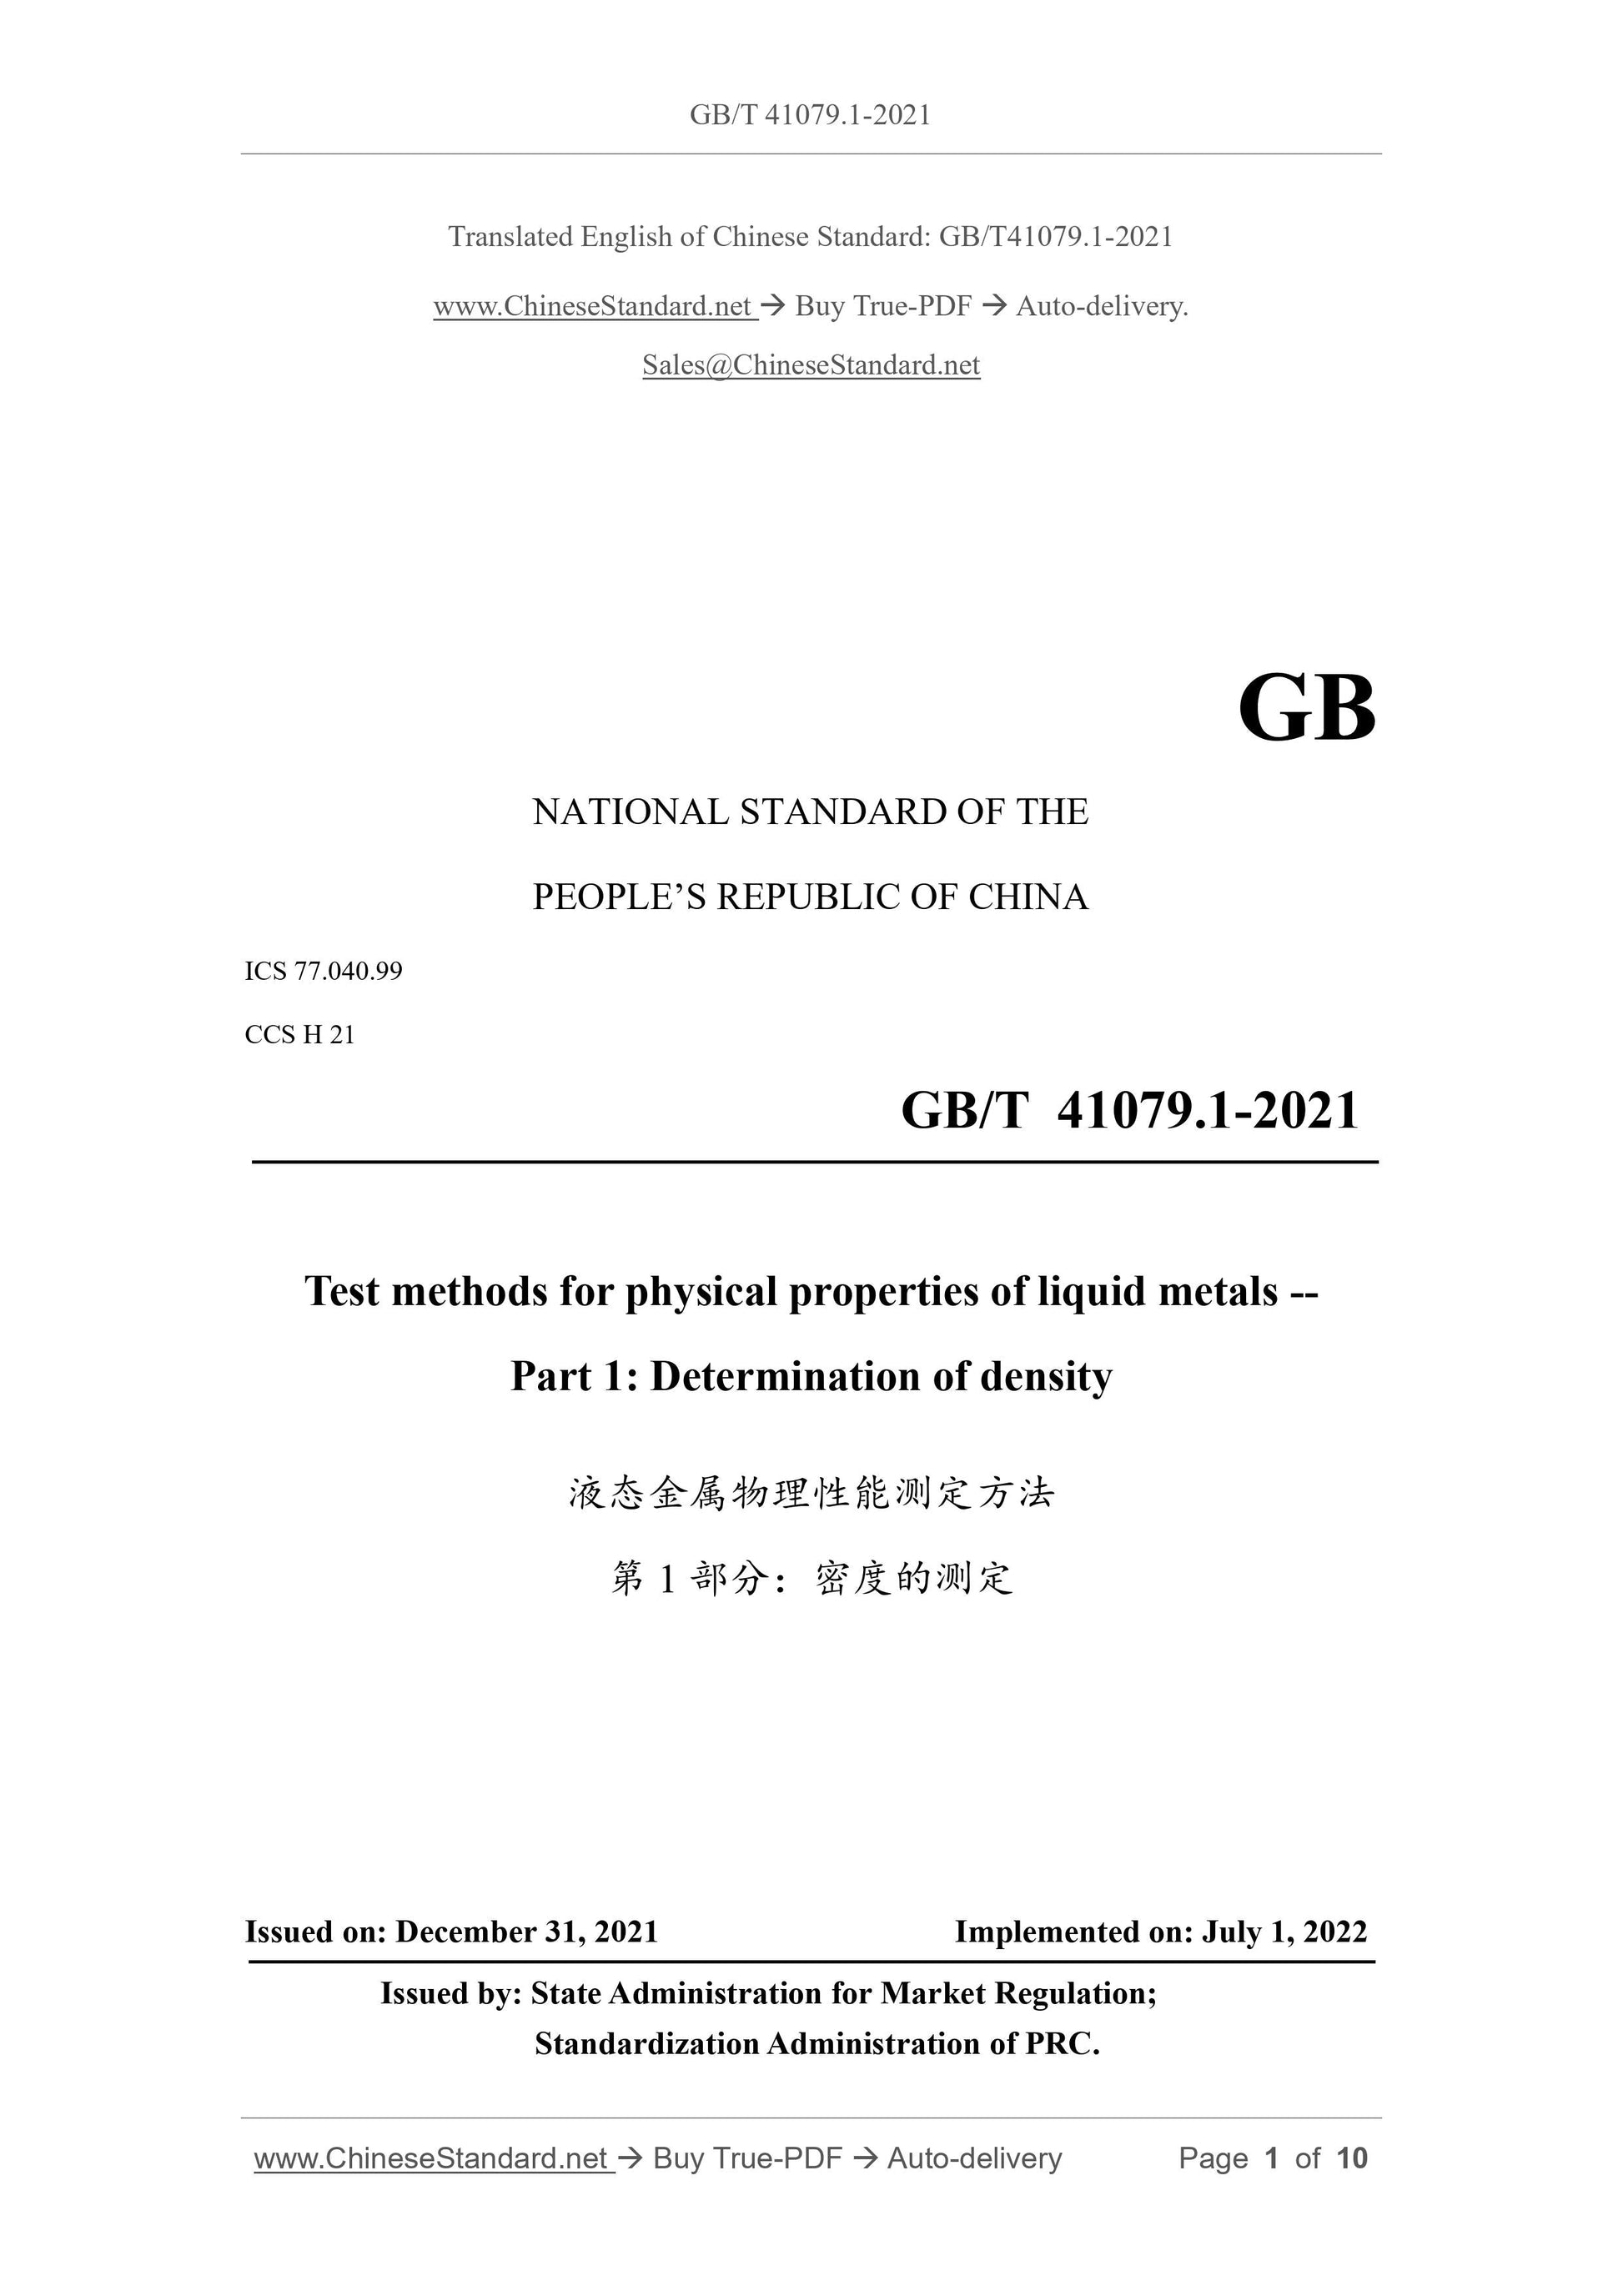 GB/T 41079.1-2021 Page 1